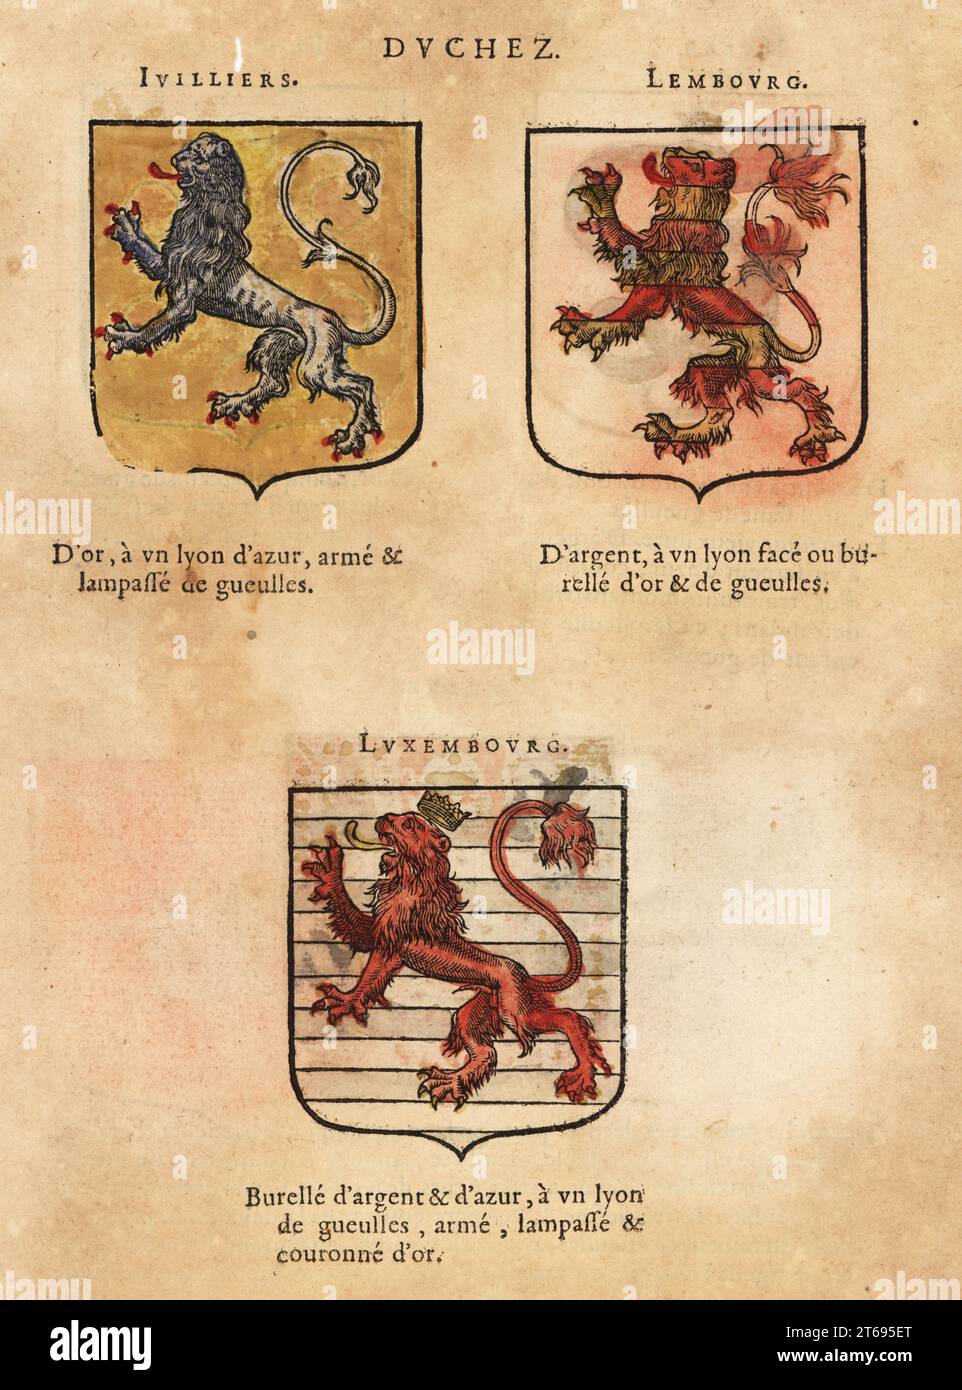 Coat of arms of the Duchy of Ivilliers with blue lion, Lemburg with gold and red lion, and Luxemburg with red lion and gold crown. Duchez Ivilliers, Lembourg, and Luxembourg. Handcoloured woodblock engraving from Hierosme de Baras Le Blason des Armoiries, Chez Rolet Boutonne, Paris, 1628. Stock Photo